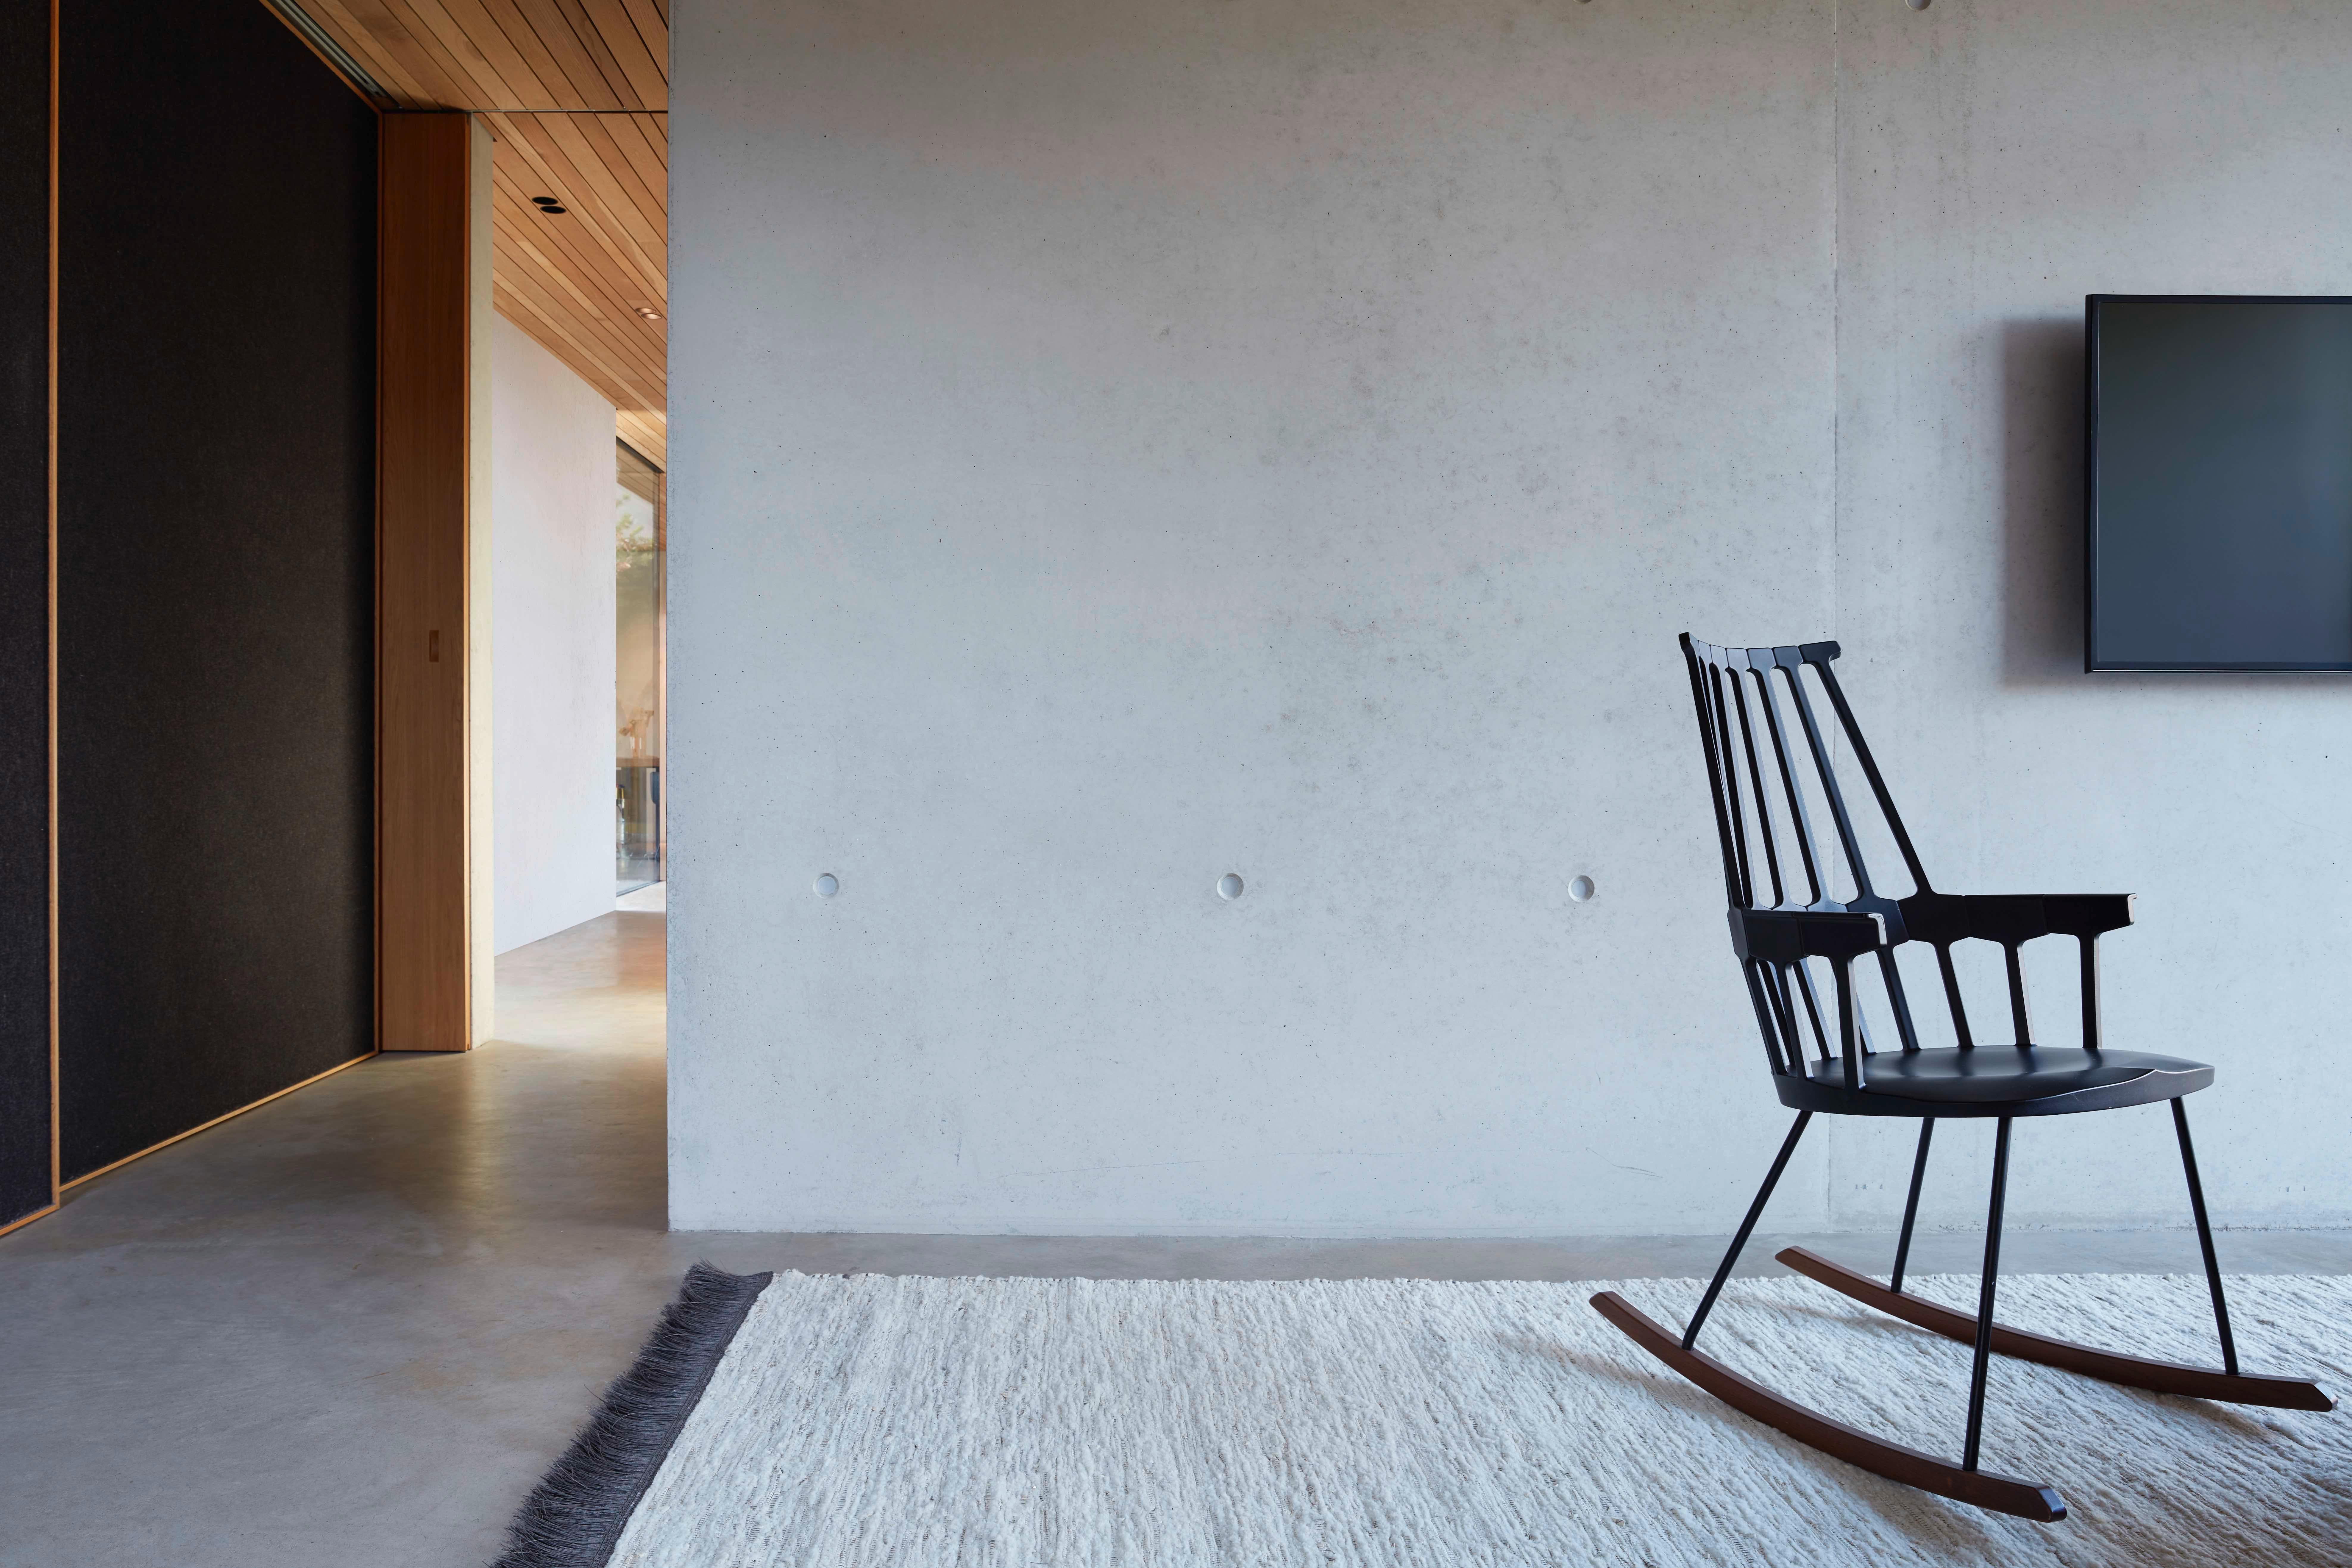 Coco Rug // indoor // German Design Award winner
Here at NOMAD, we believe in innovation, in pushing boundaries and redefining the image of re- and upcycling in the interior industry. Our goal is to create design products with a special feel, a